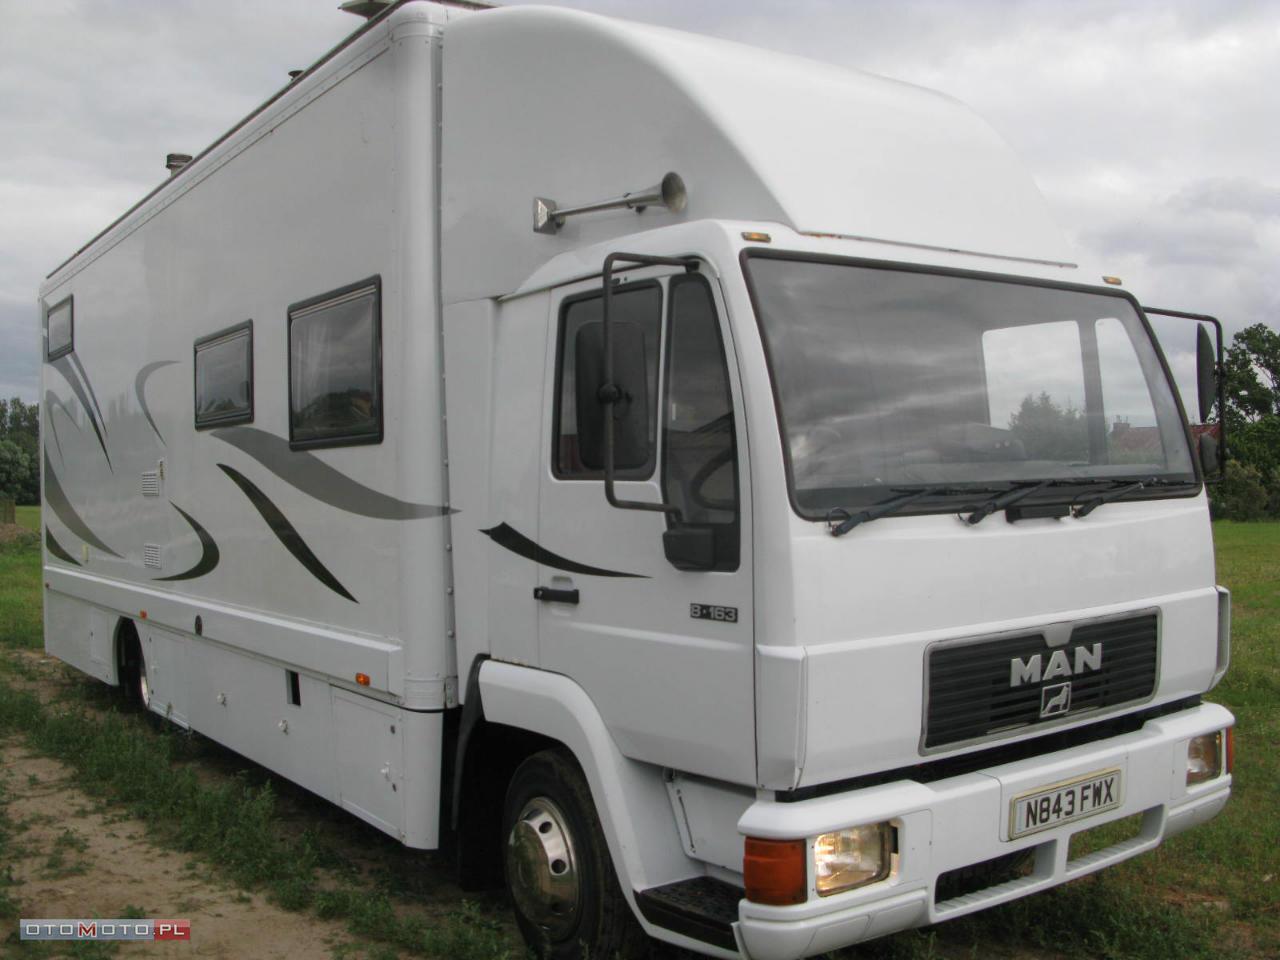 Motorhome from 50 to 70 thousand PLN – image 2